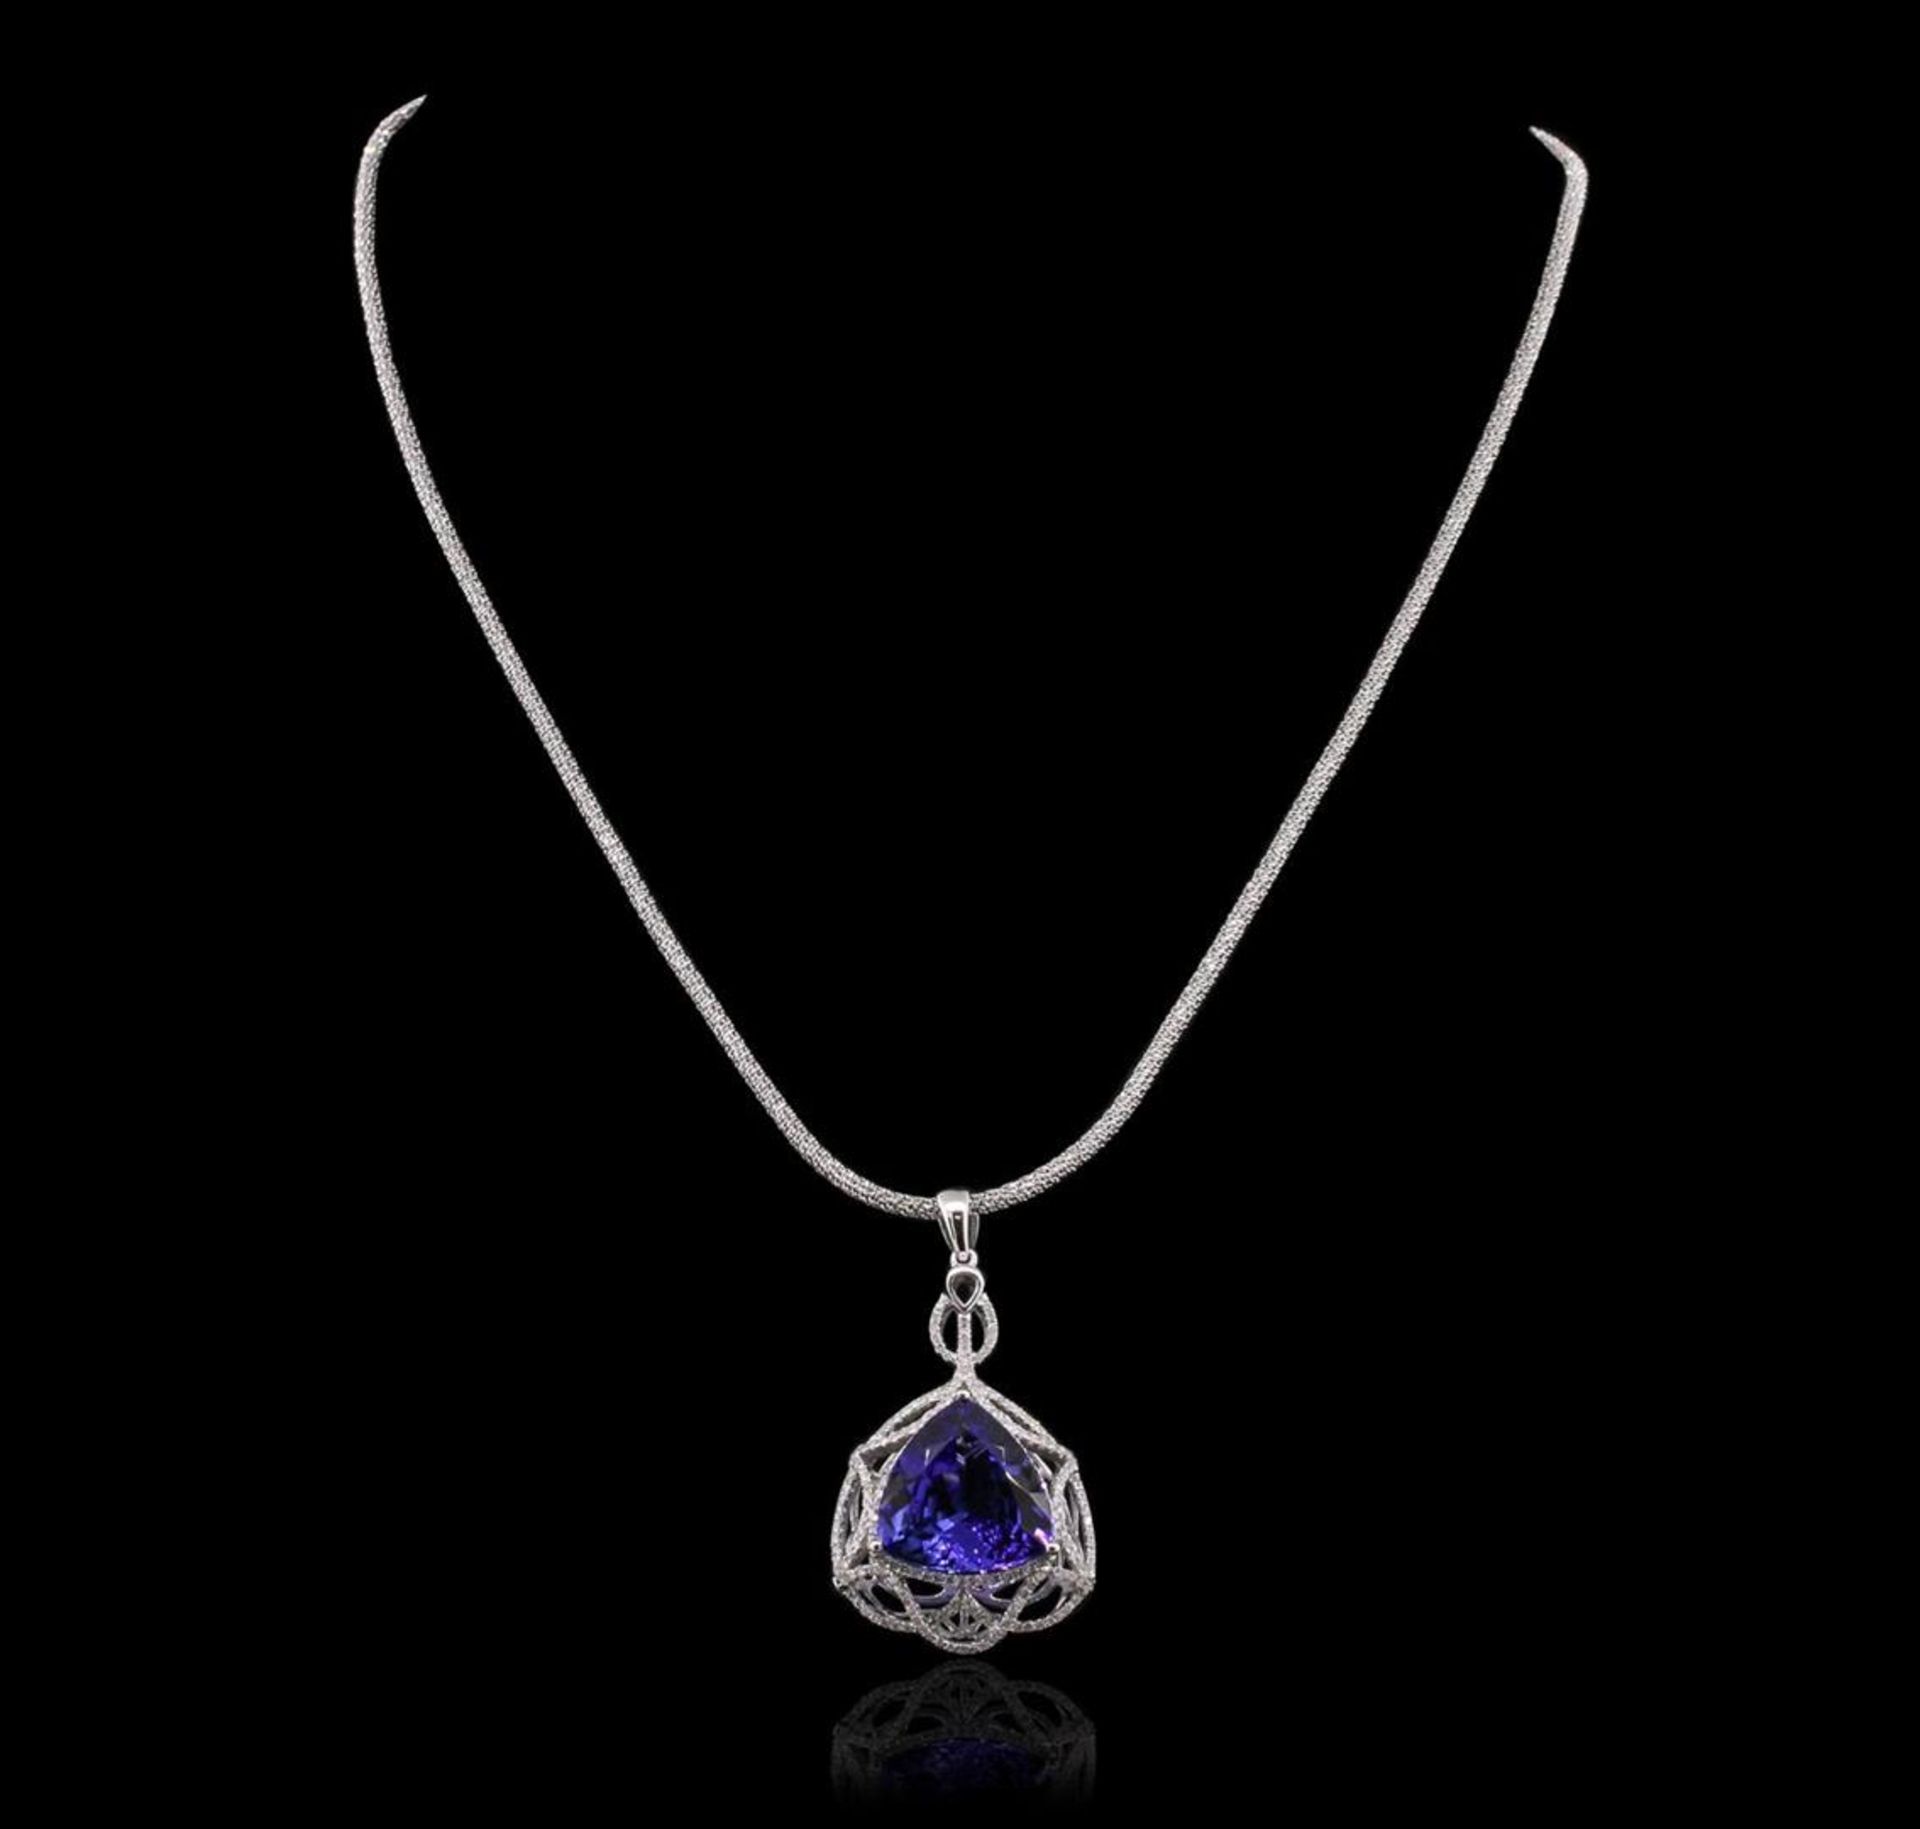 14KT White Gold 11.31 ctw GIA Certified Tanzanite and Diamond Pendant With Chain - Image 2 of 4